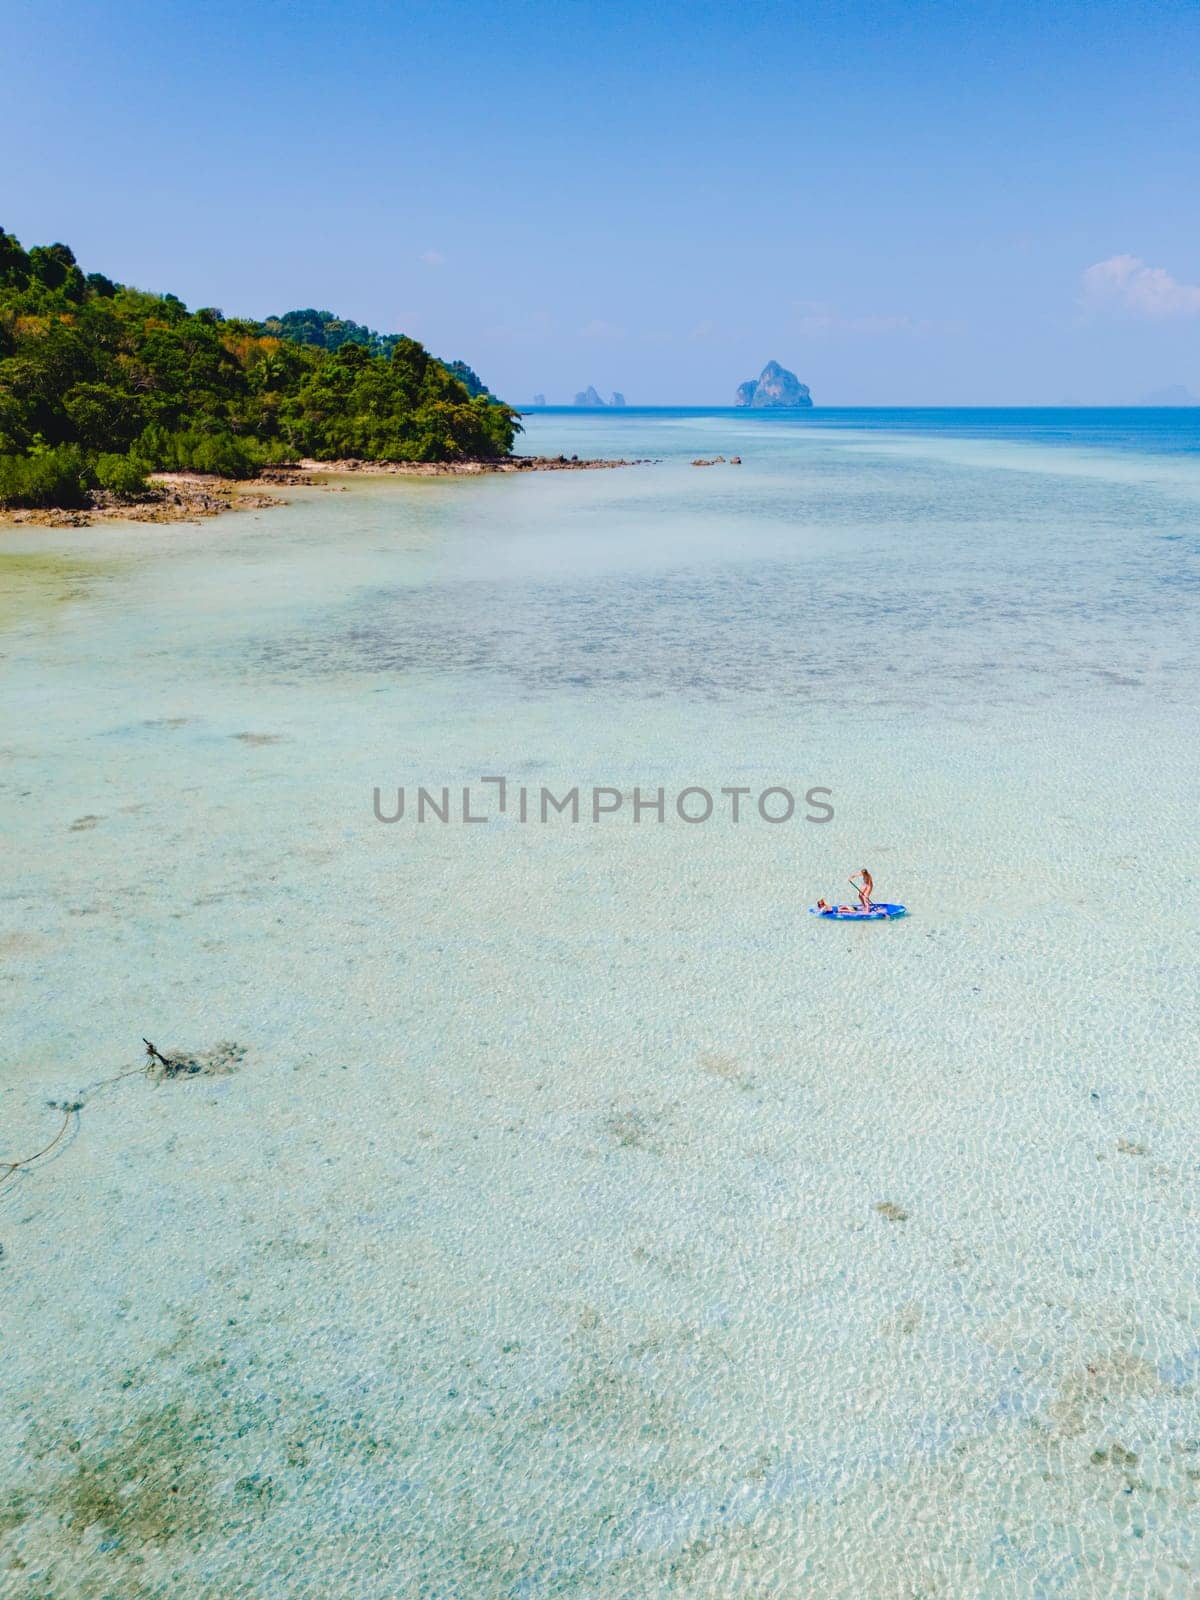 woman at peddle board sup at Koh Kradan a tropical island in Thailand, Top down view picture of a woman paddling on the sup board.